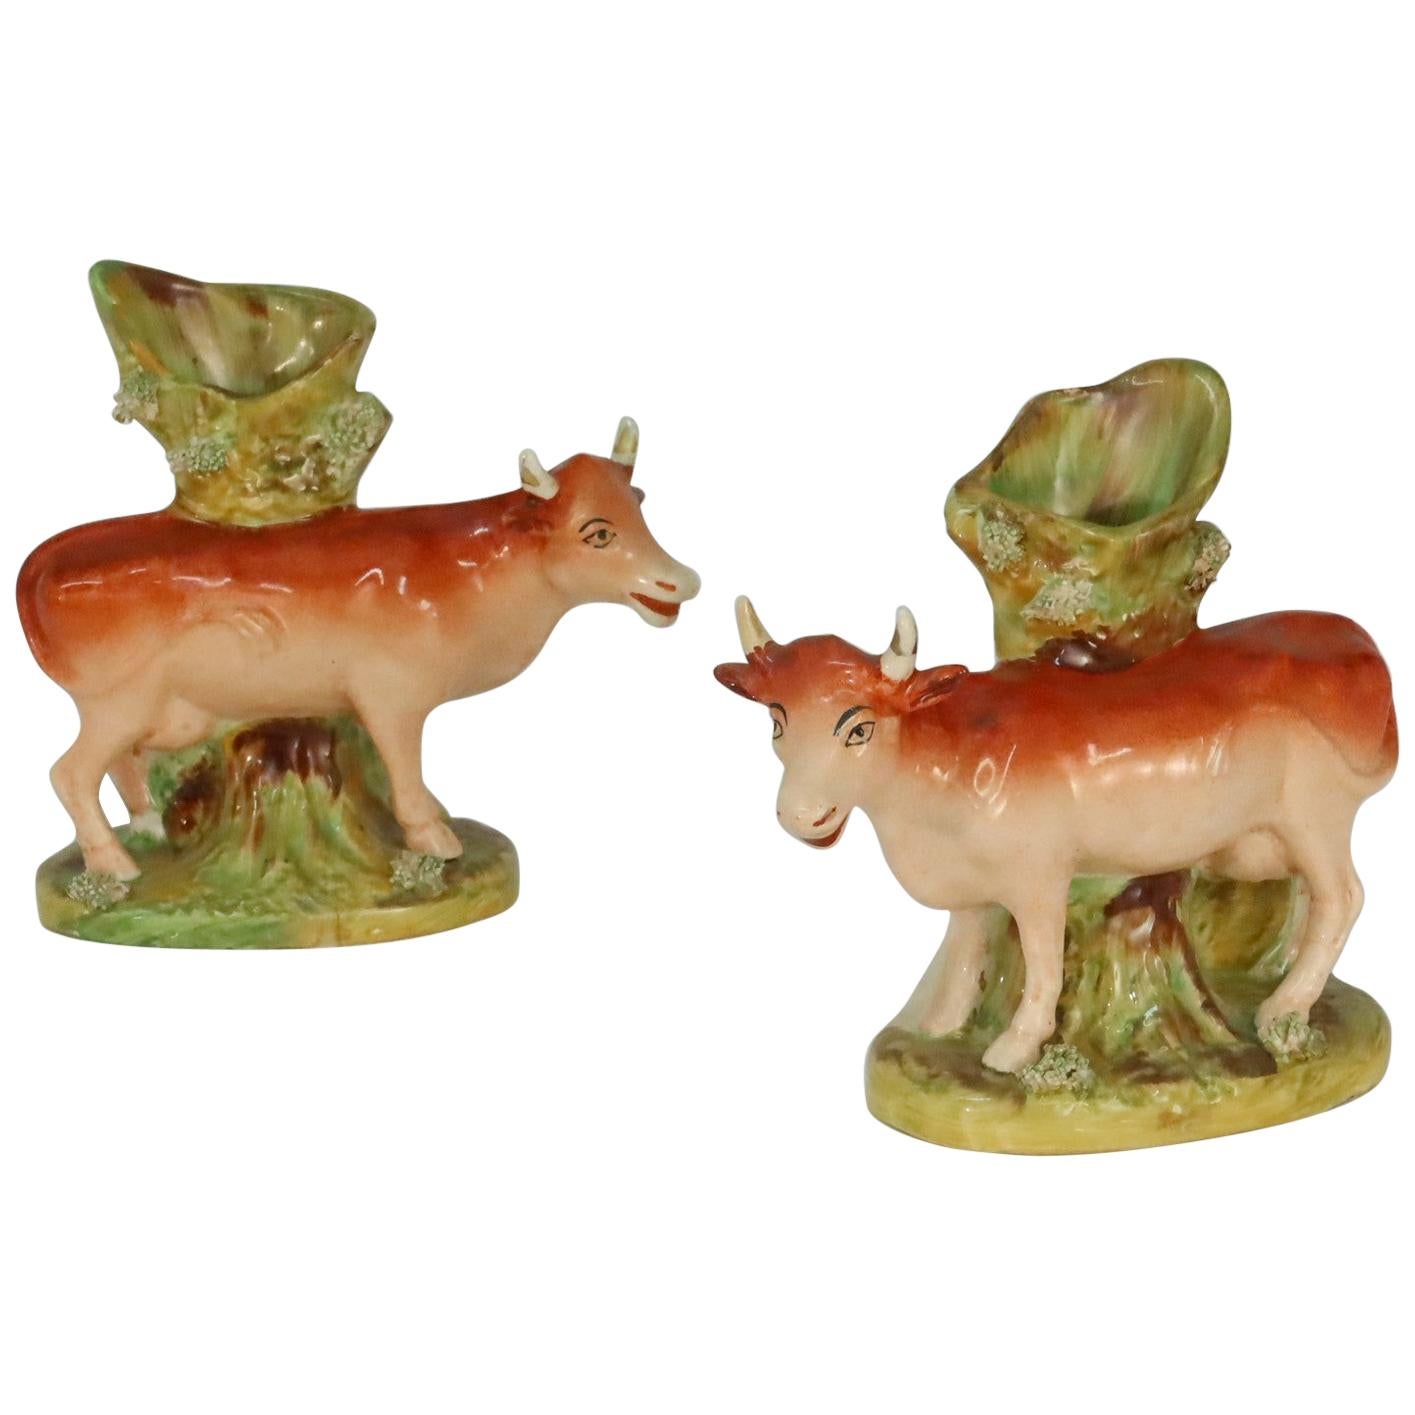 Pair of Antique English Staffordshire Cow Spill Vases, circa 1840 For Sale